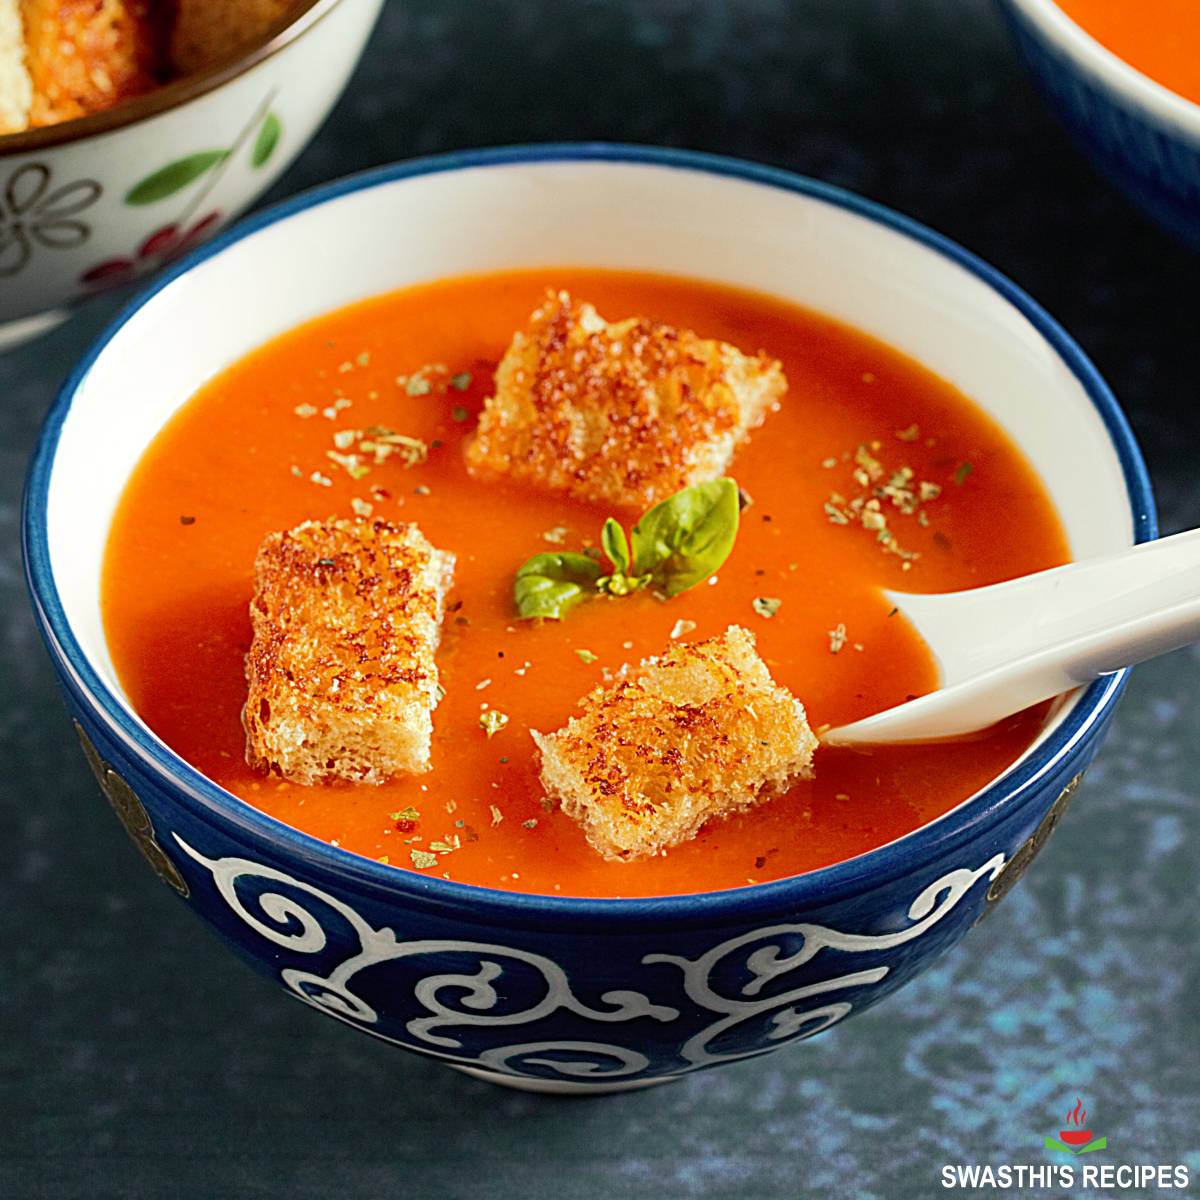 Tomato Soup Recipe with Fresh Tomatoes   Swasthi s Recipes - 56